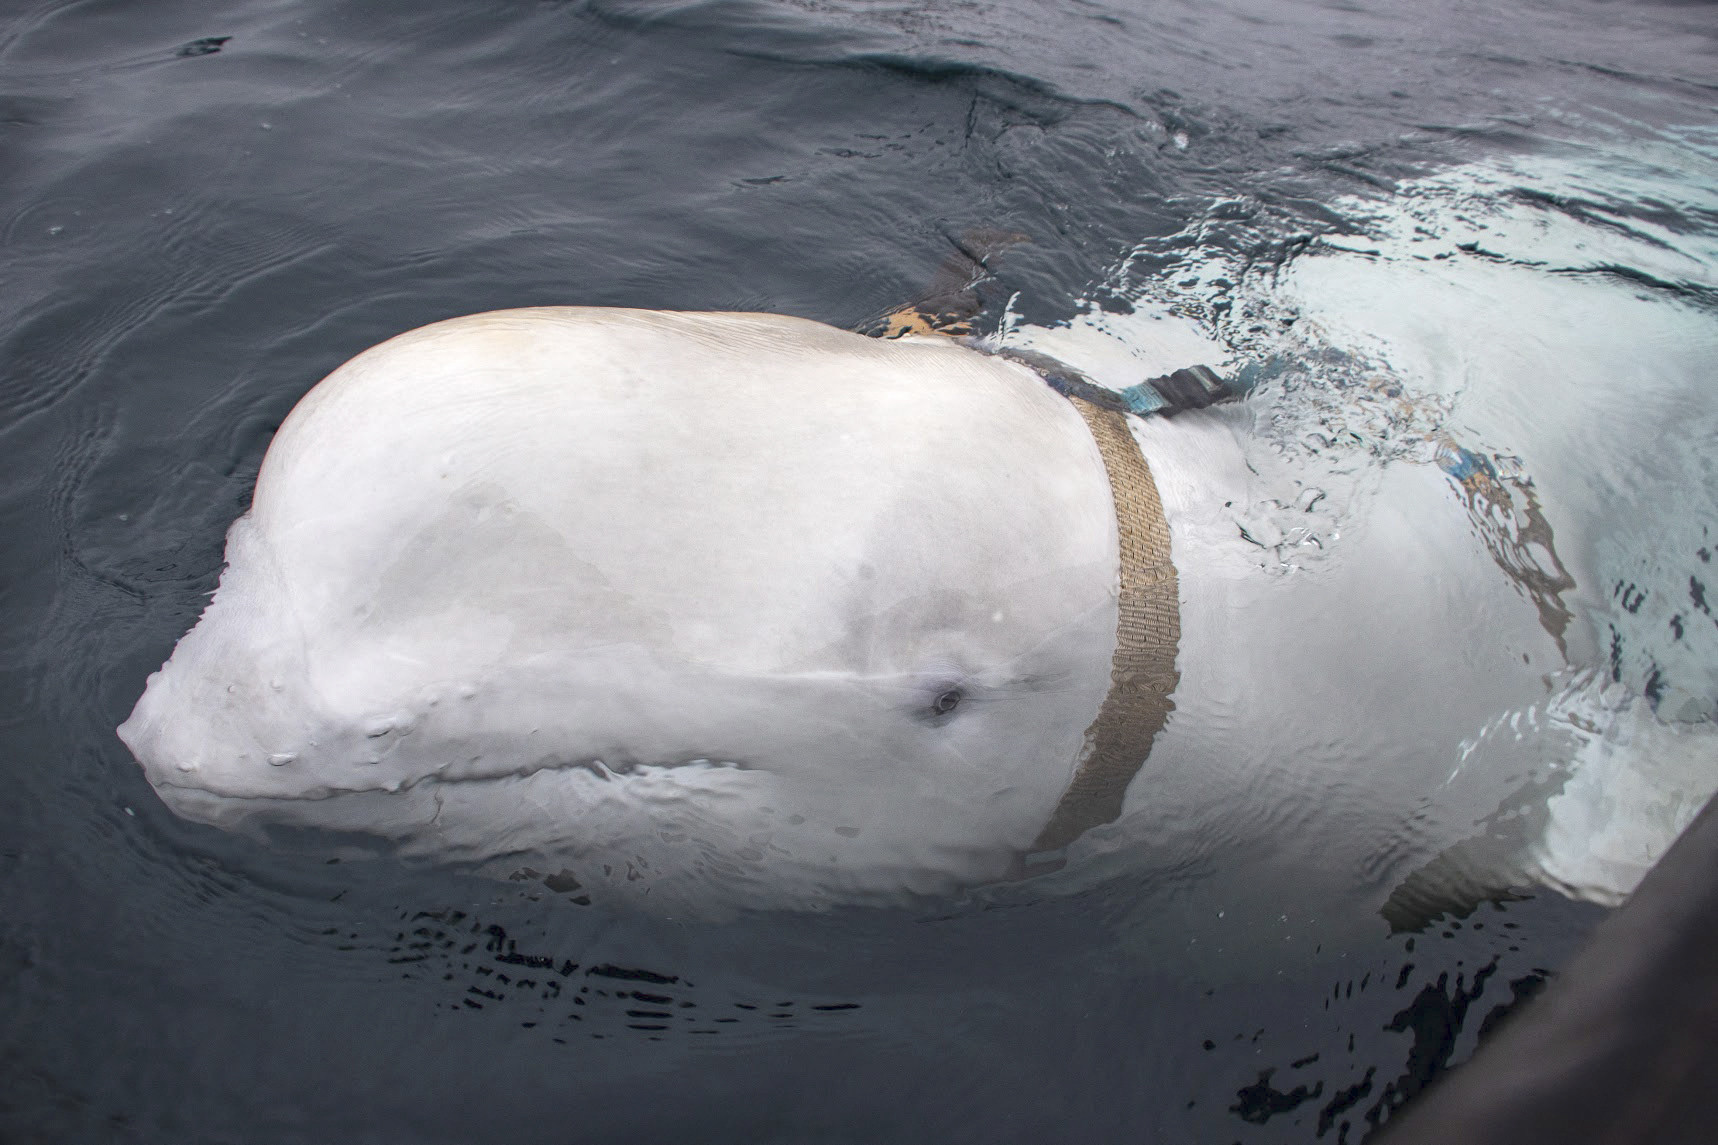 A white whale wearing a harness, was seen by fishermen off the coast of northern Norway in April 2019. Photo: Norwegian Directorate of Fisheries via AFP